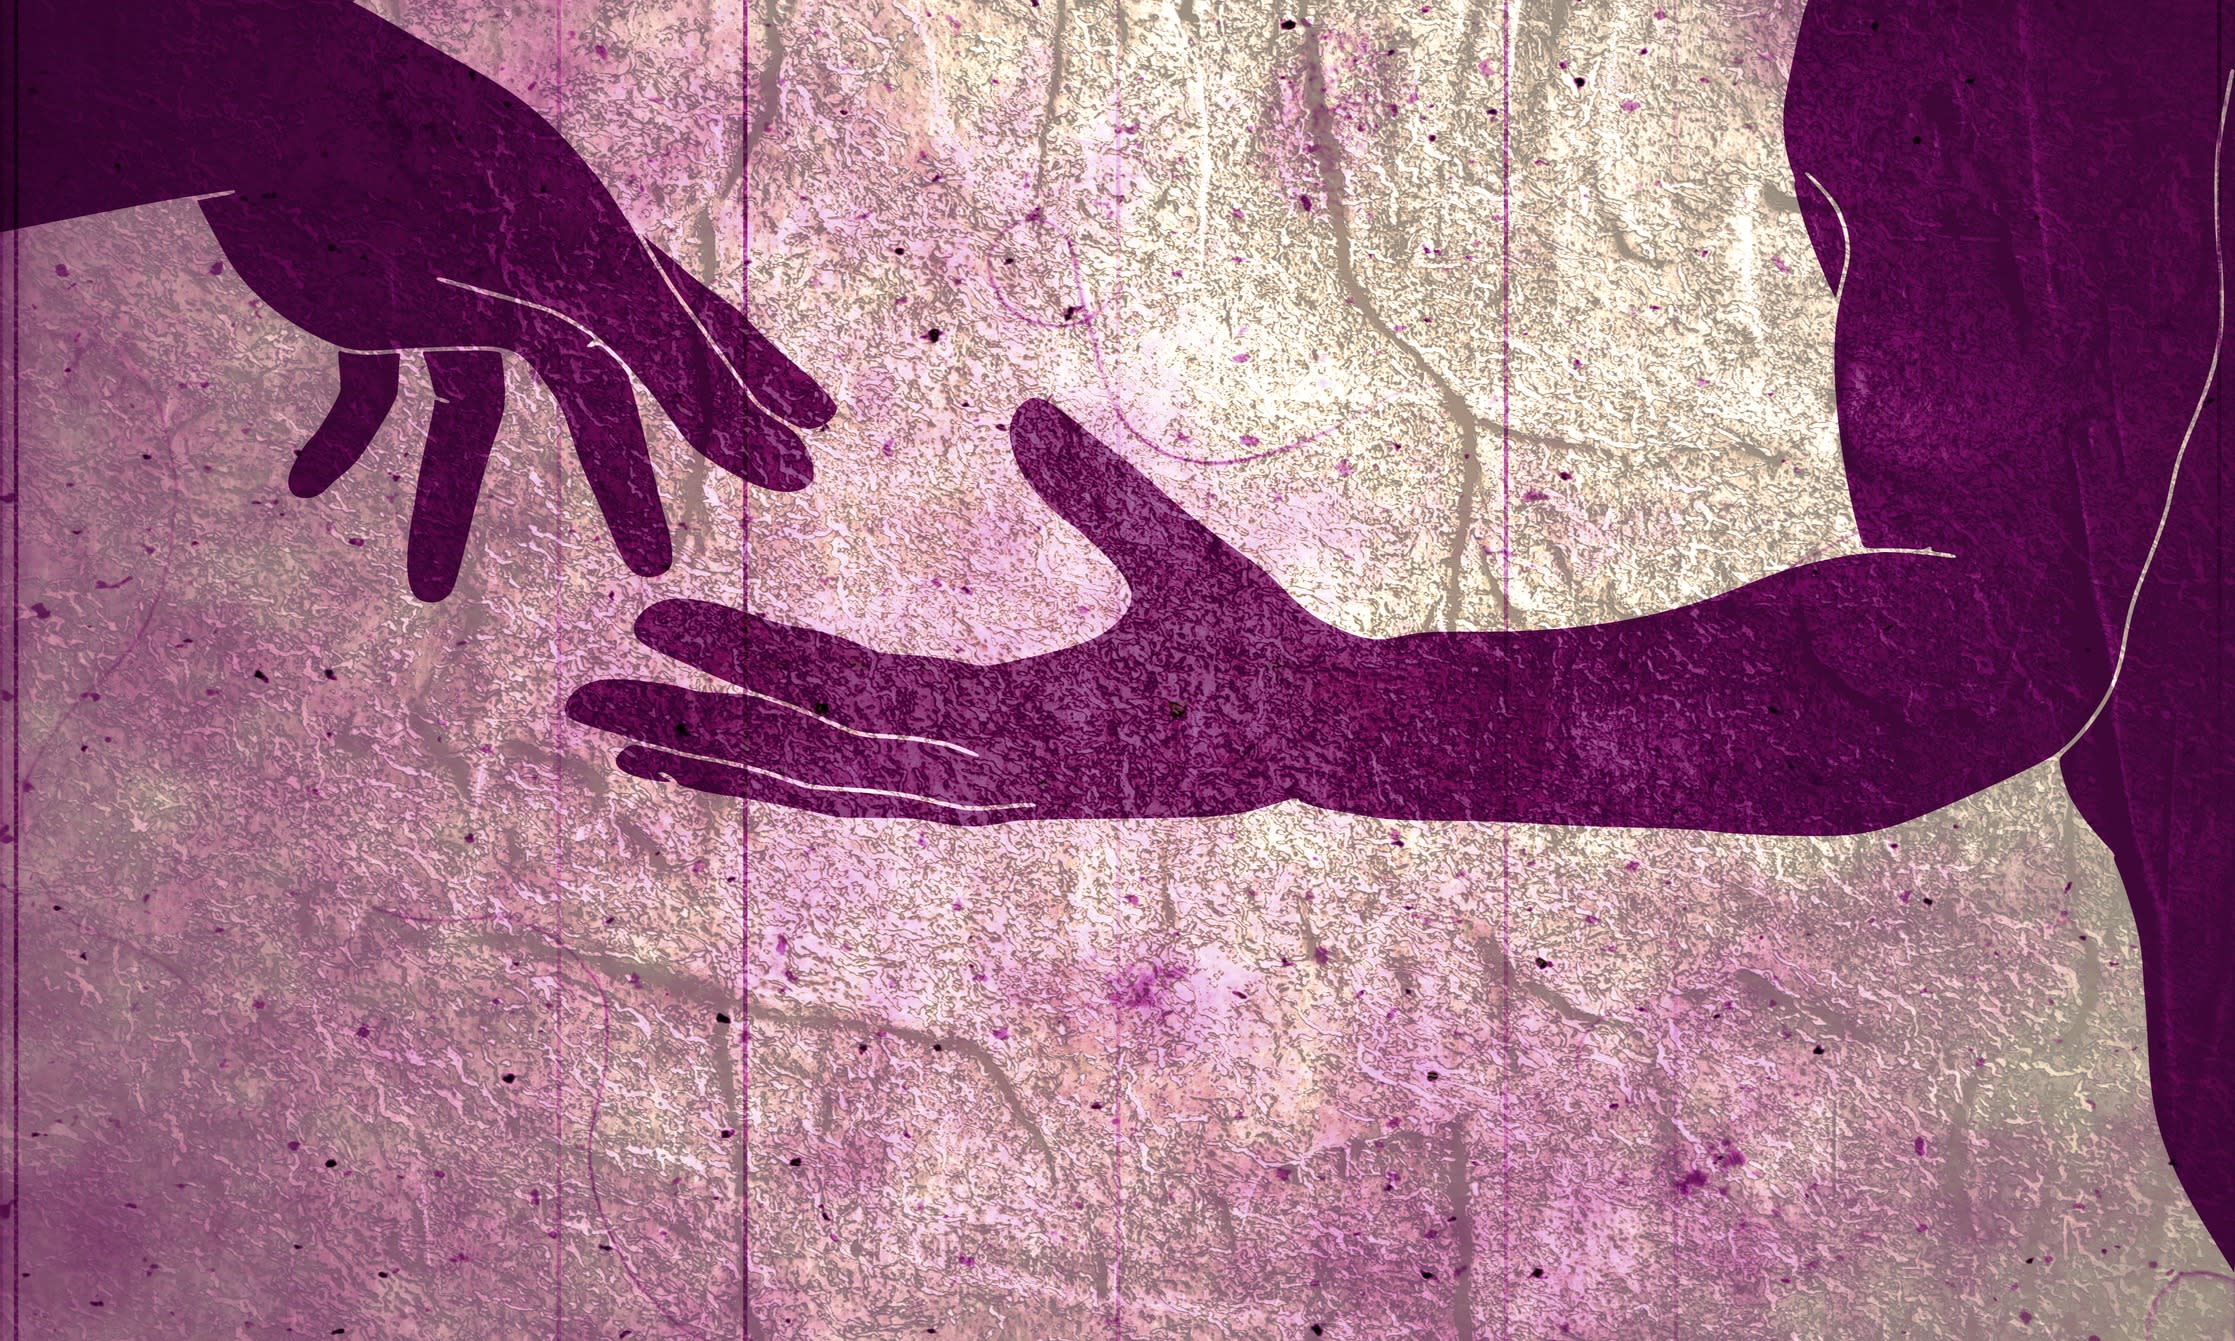 Illustration of two hands about to touch